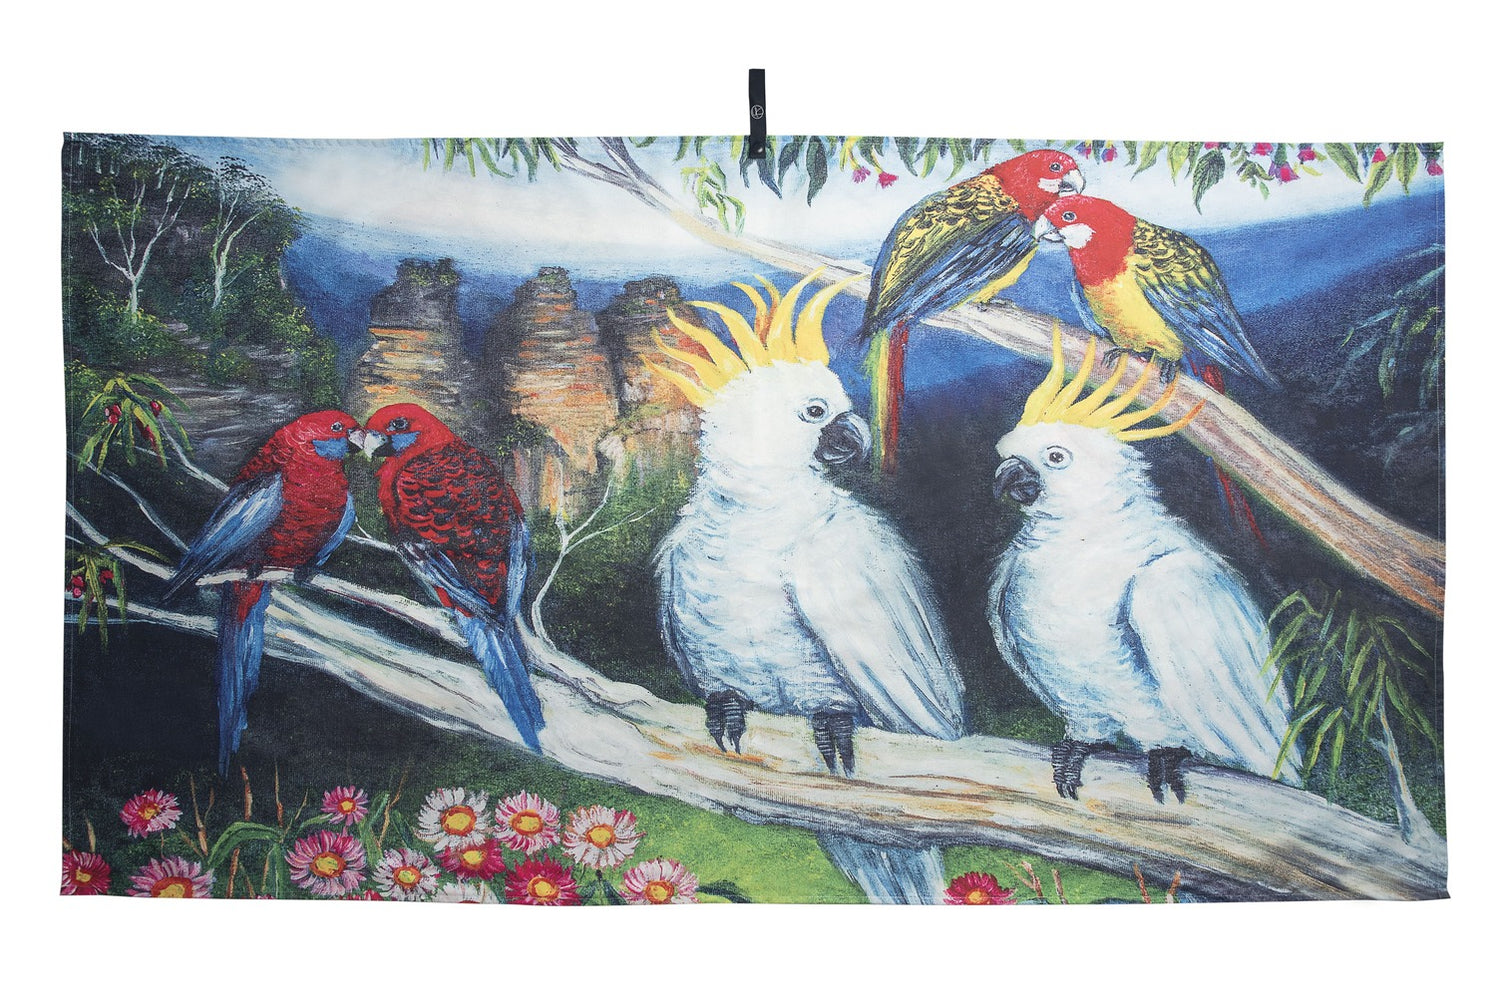 Blue Mountains microfibre artistic towel. The towel shows an art inspiration of New South Wales magnificent Blue Mountains. The art printed on the towel shows a greenery scenery of the Three Sisters and the mountains at the back involved in blue haze, Eucalyptus trees, pink flowers and Cockatoos, Rosellas, and Rainbow Lorikeets on a tree branch. Large size, 170cm x 95cm, soft touch, compact and sand free beach towel. An Aussie-inspired art showcasing magnificent landmarks and the Aussie lifestyle.